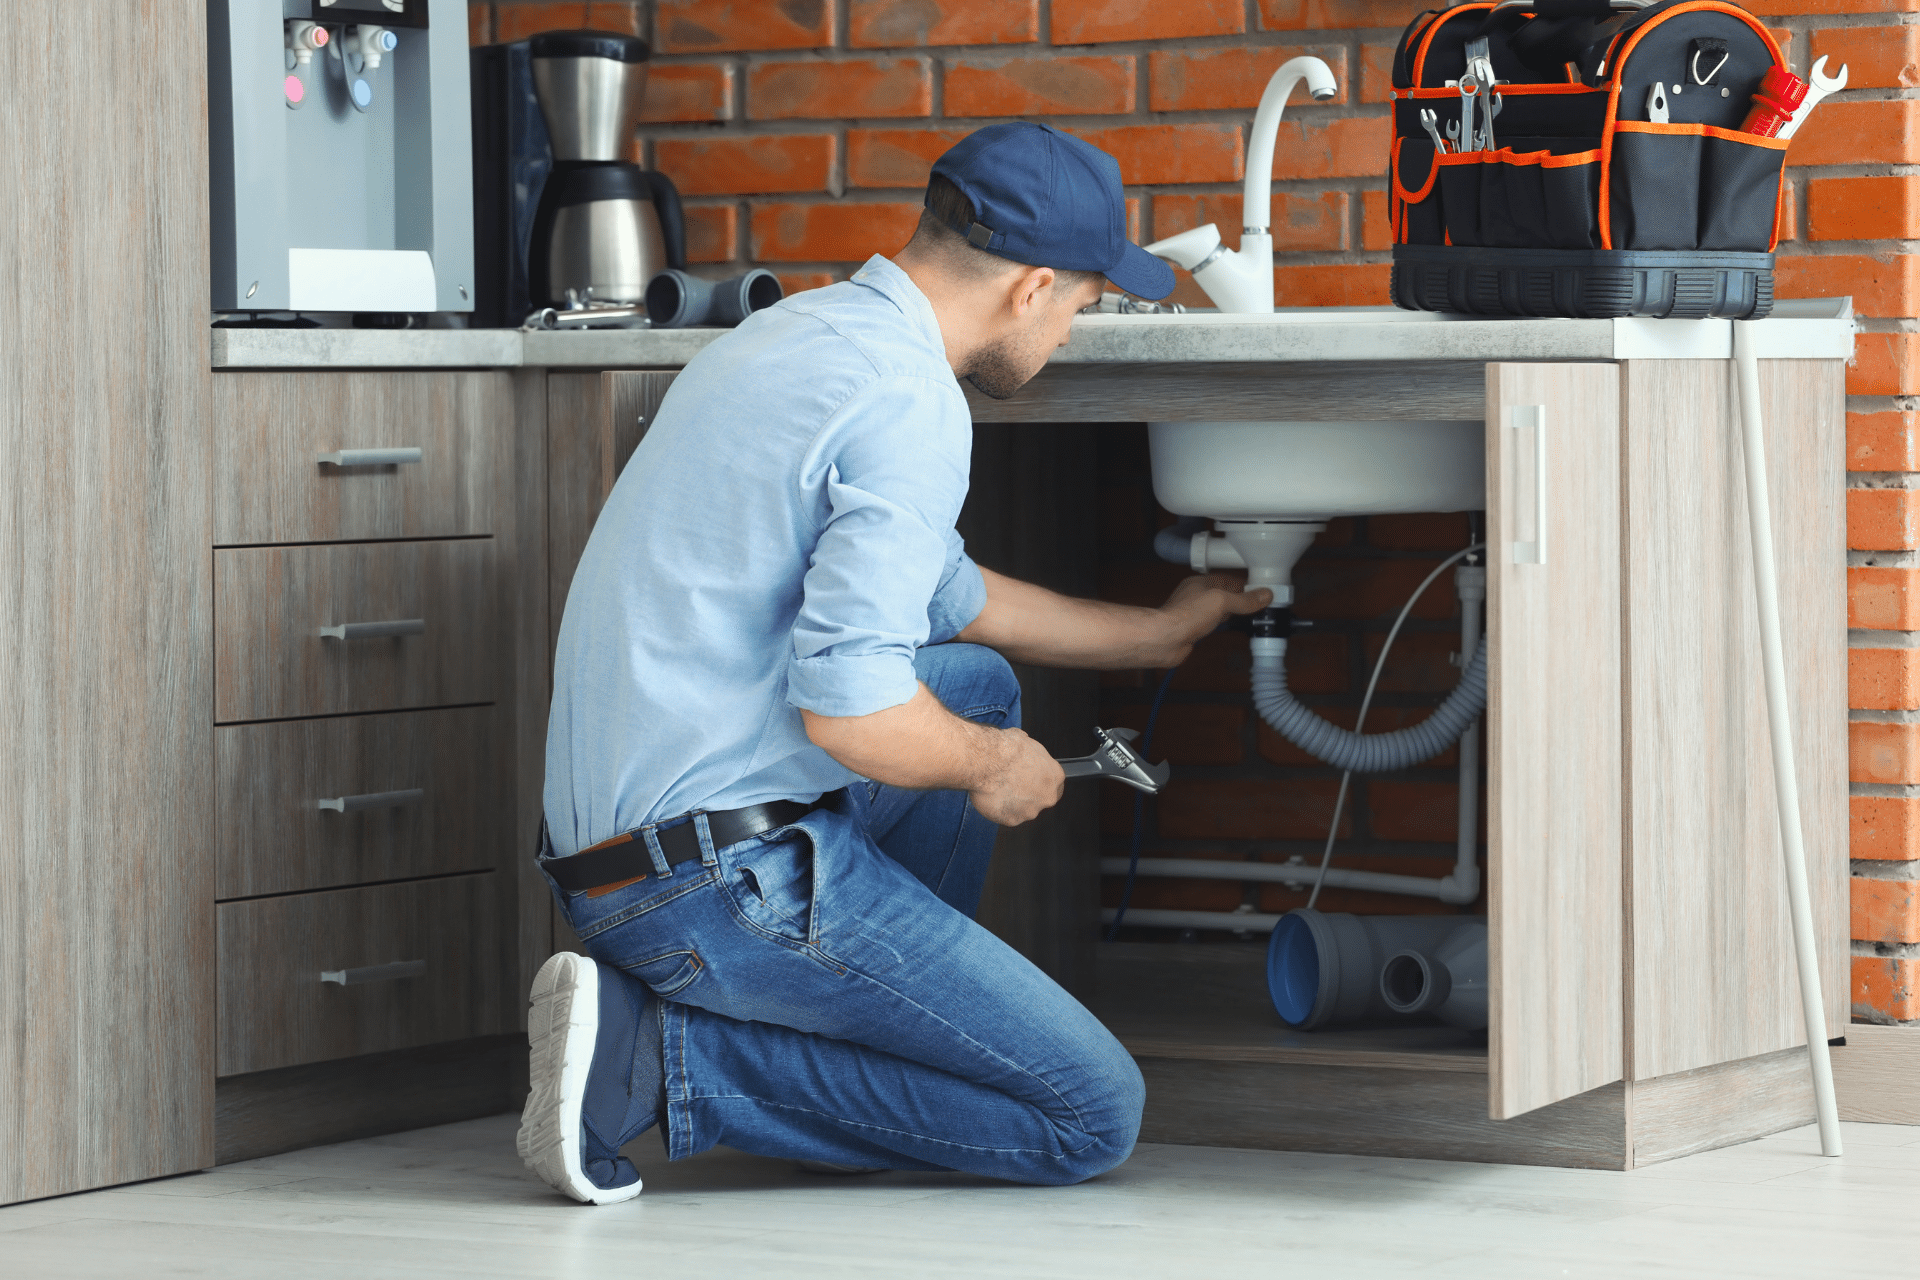 A man in a blue shirt performing plumbing repairs on a bathroom sink.